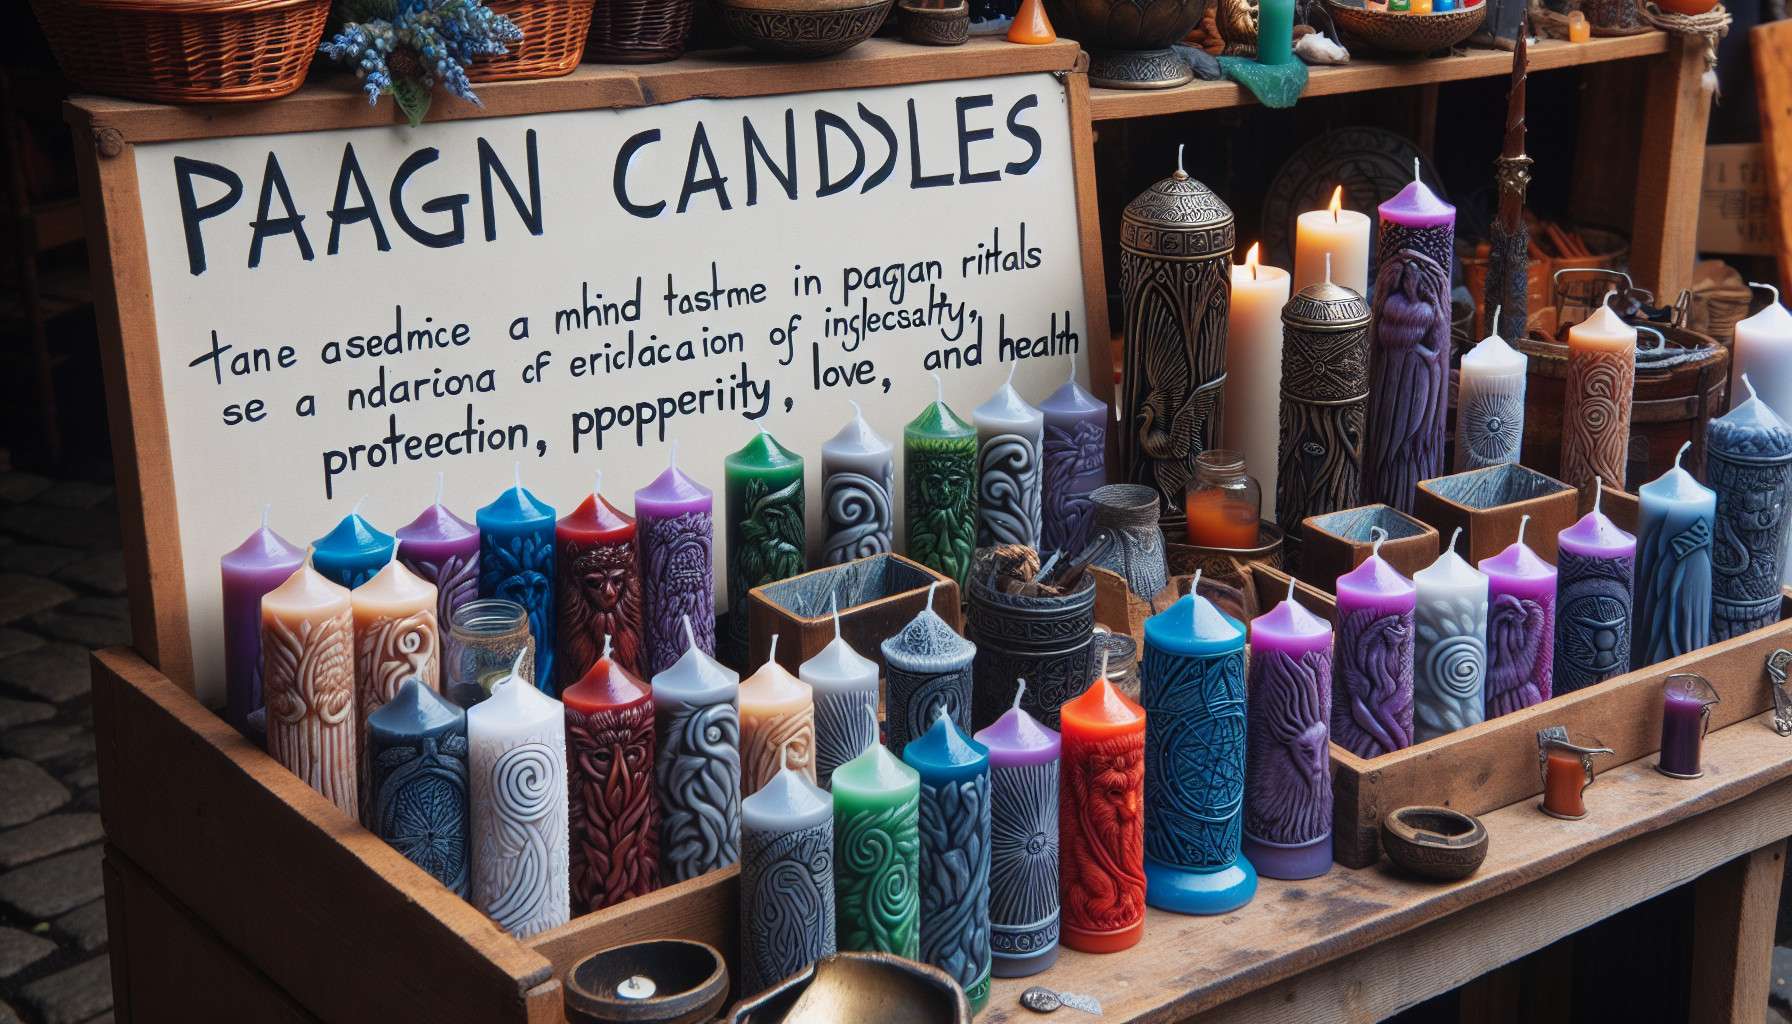 Where Can I Find Pagan Candles For Sale And What Are They For?